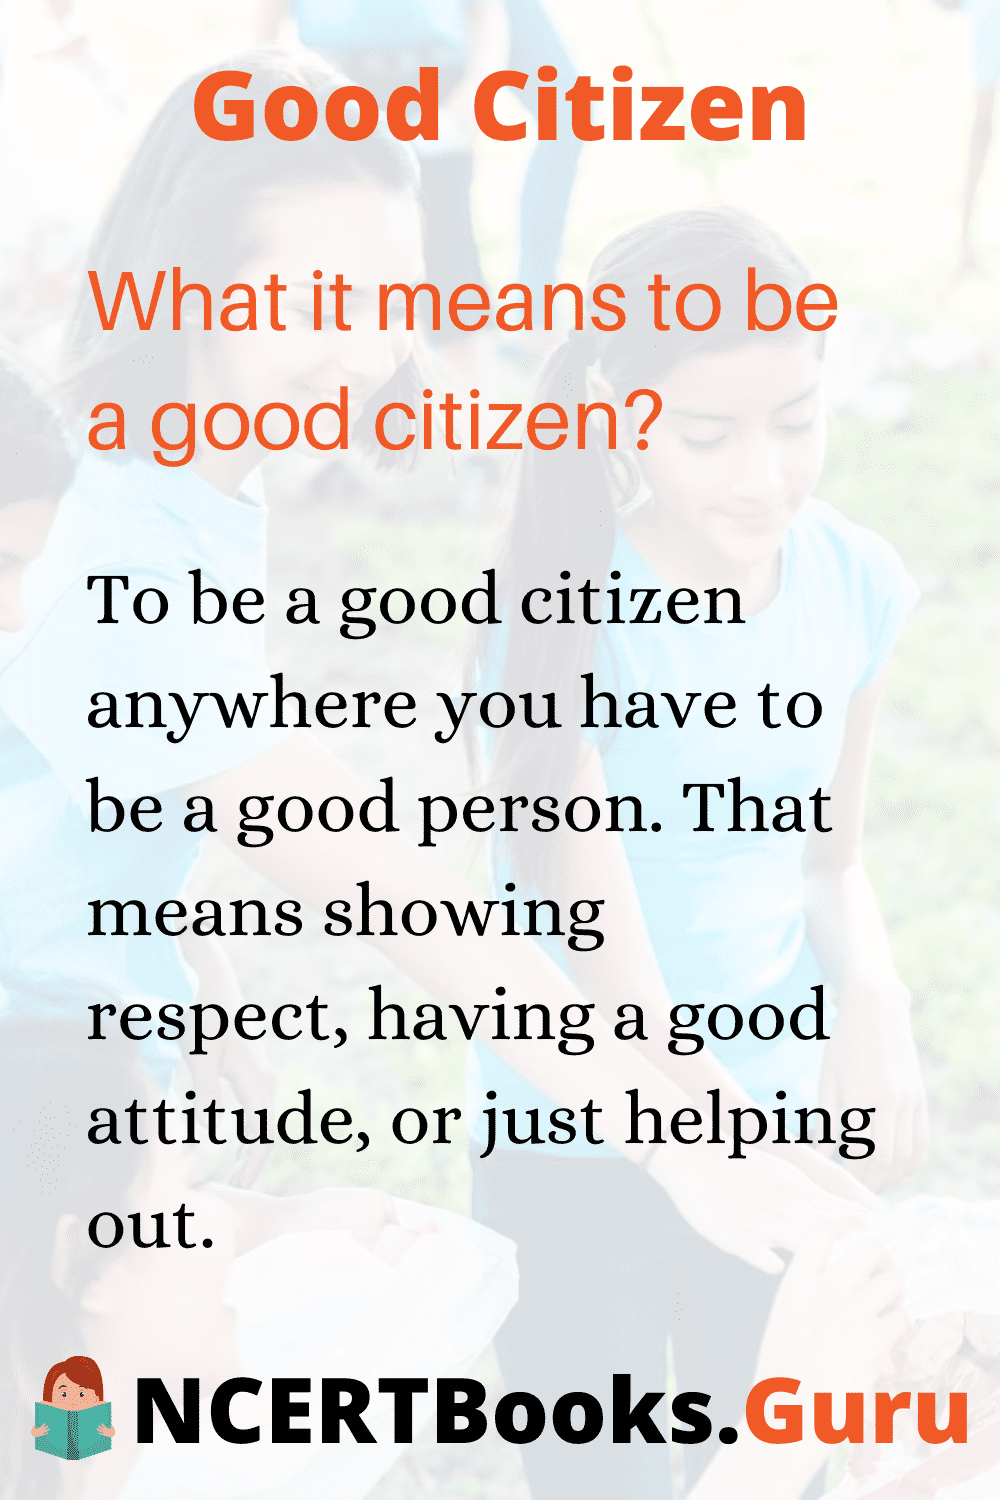 What are the roles and qualities of a good citizen